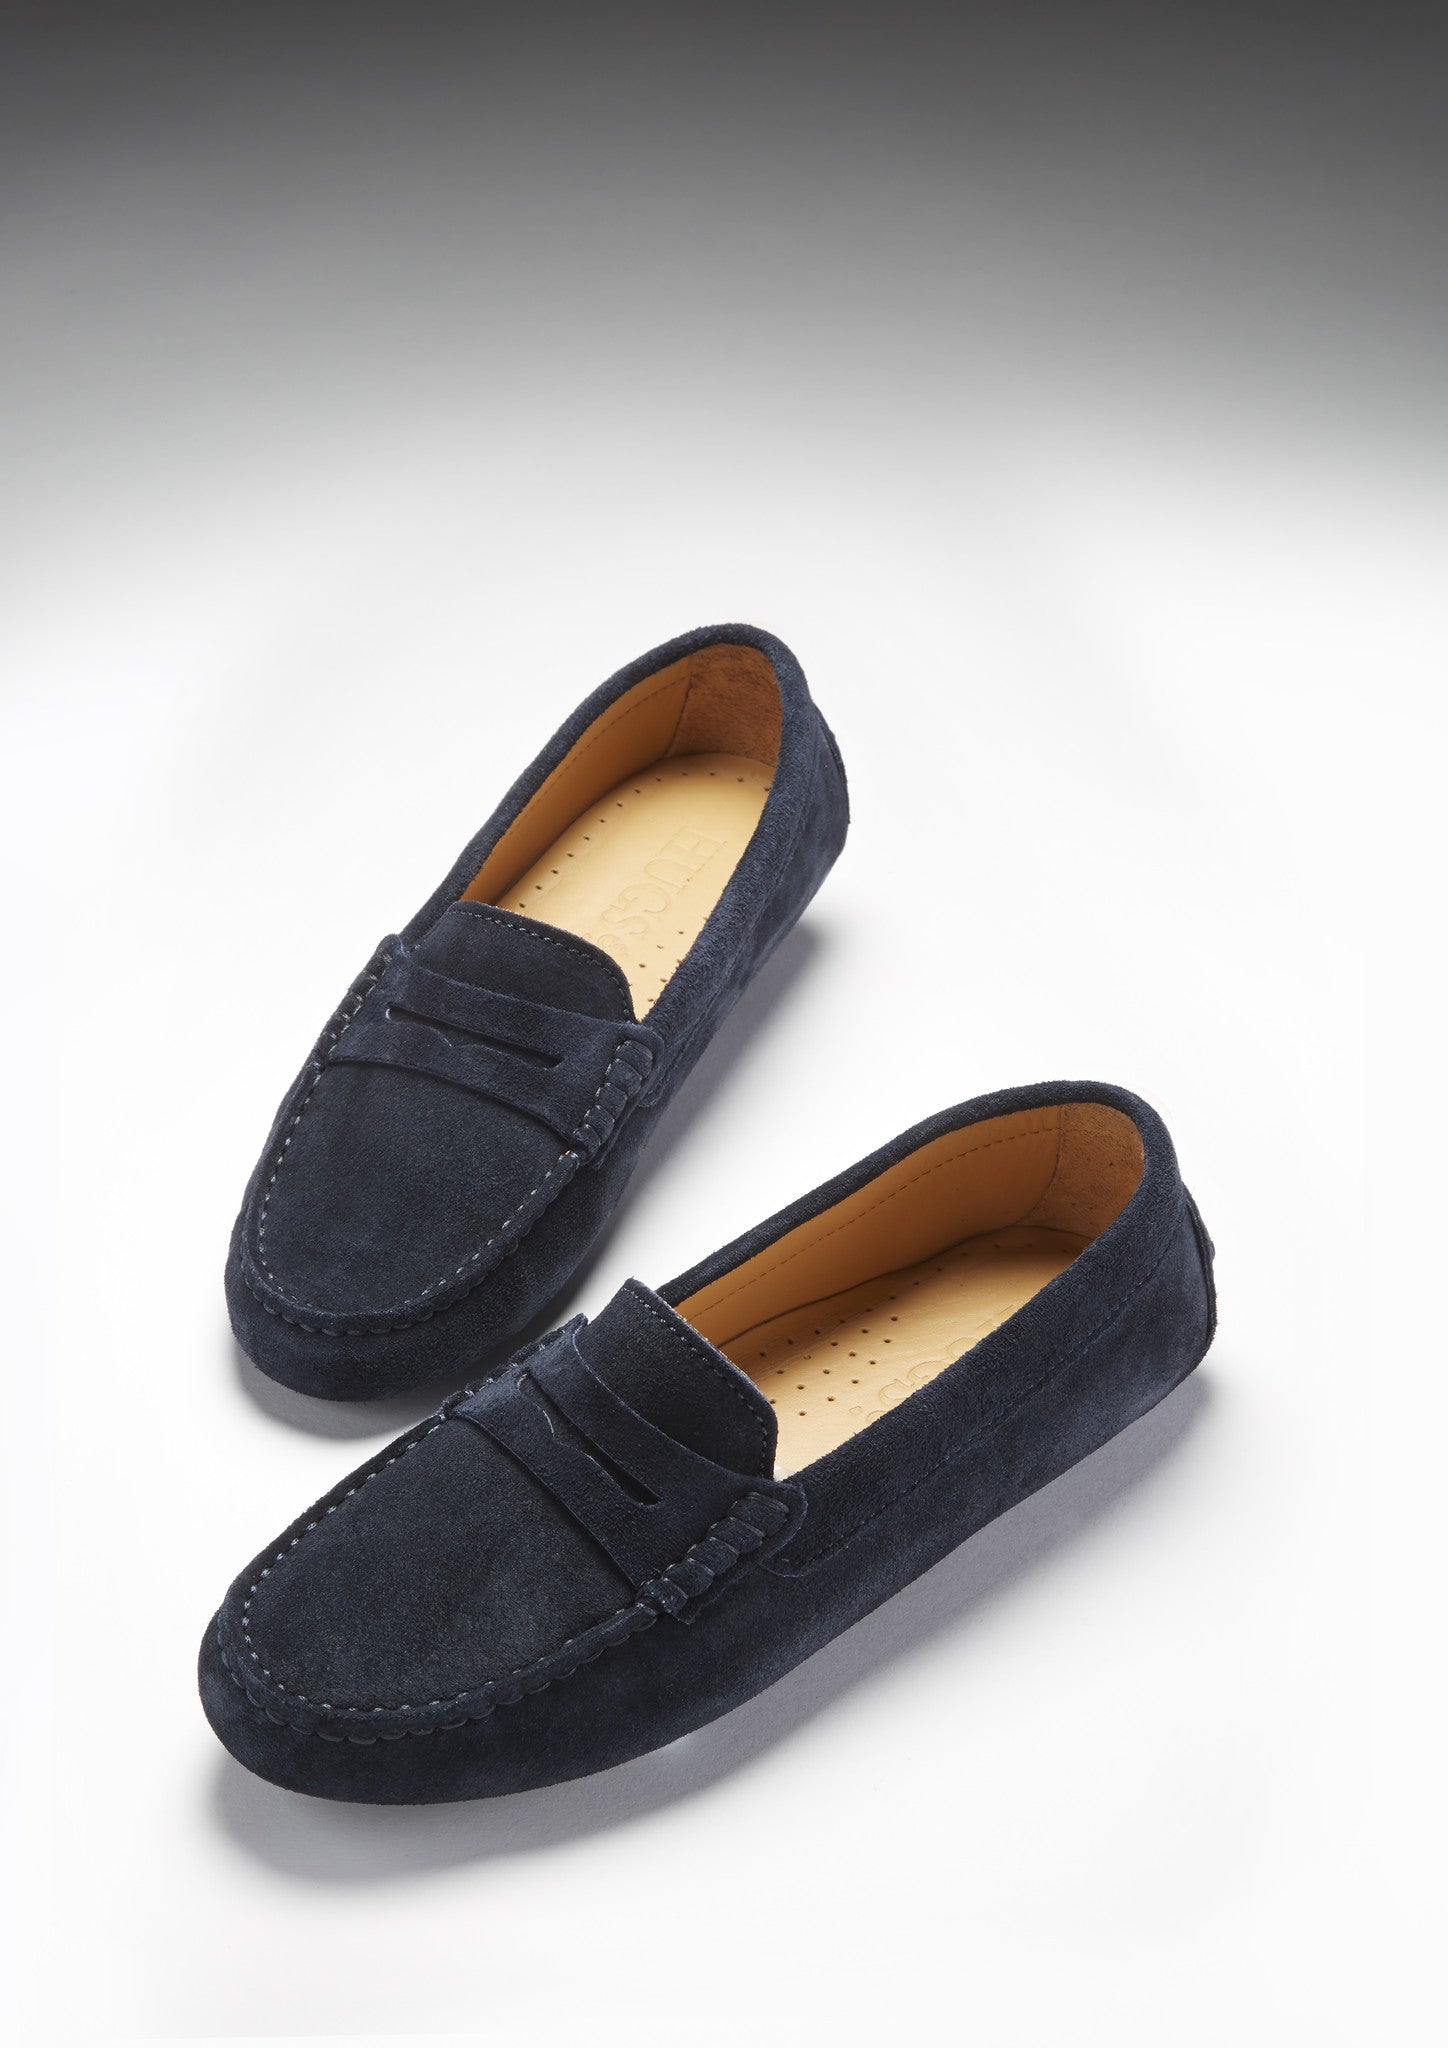 women's navy and white loafers